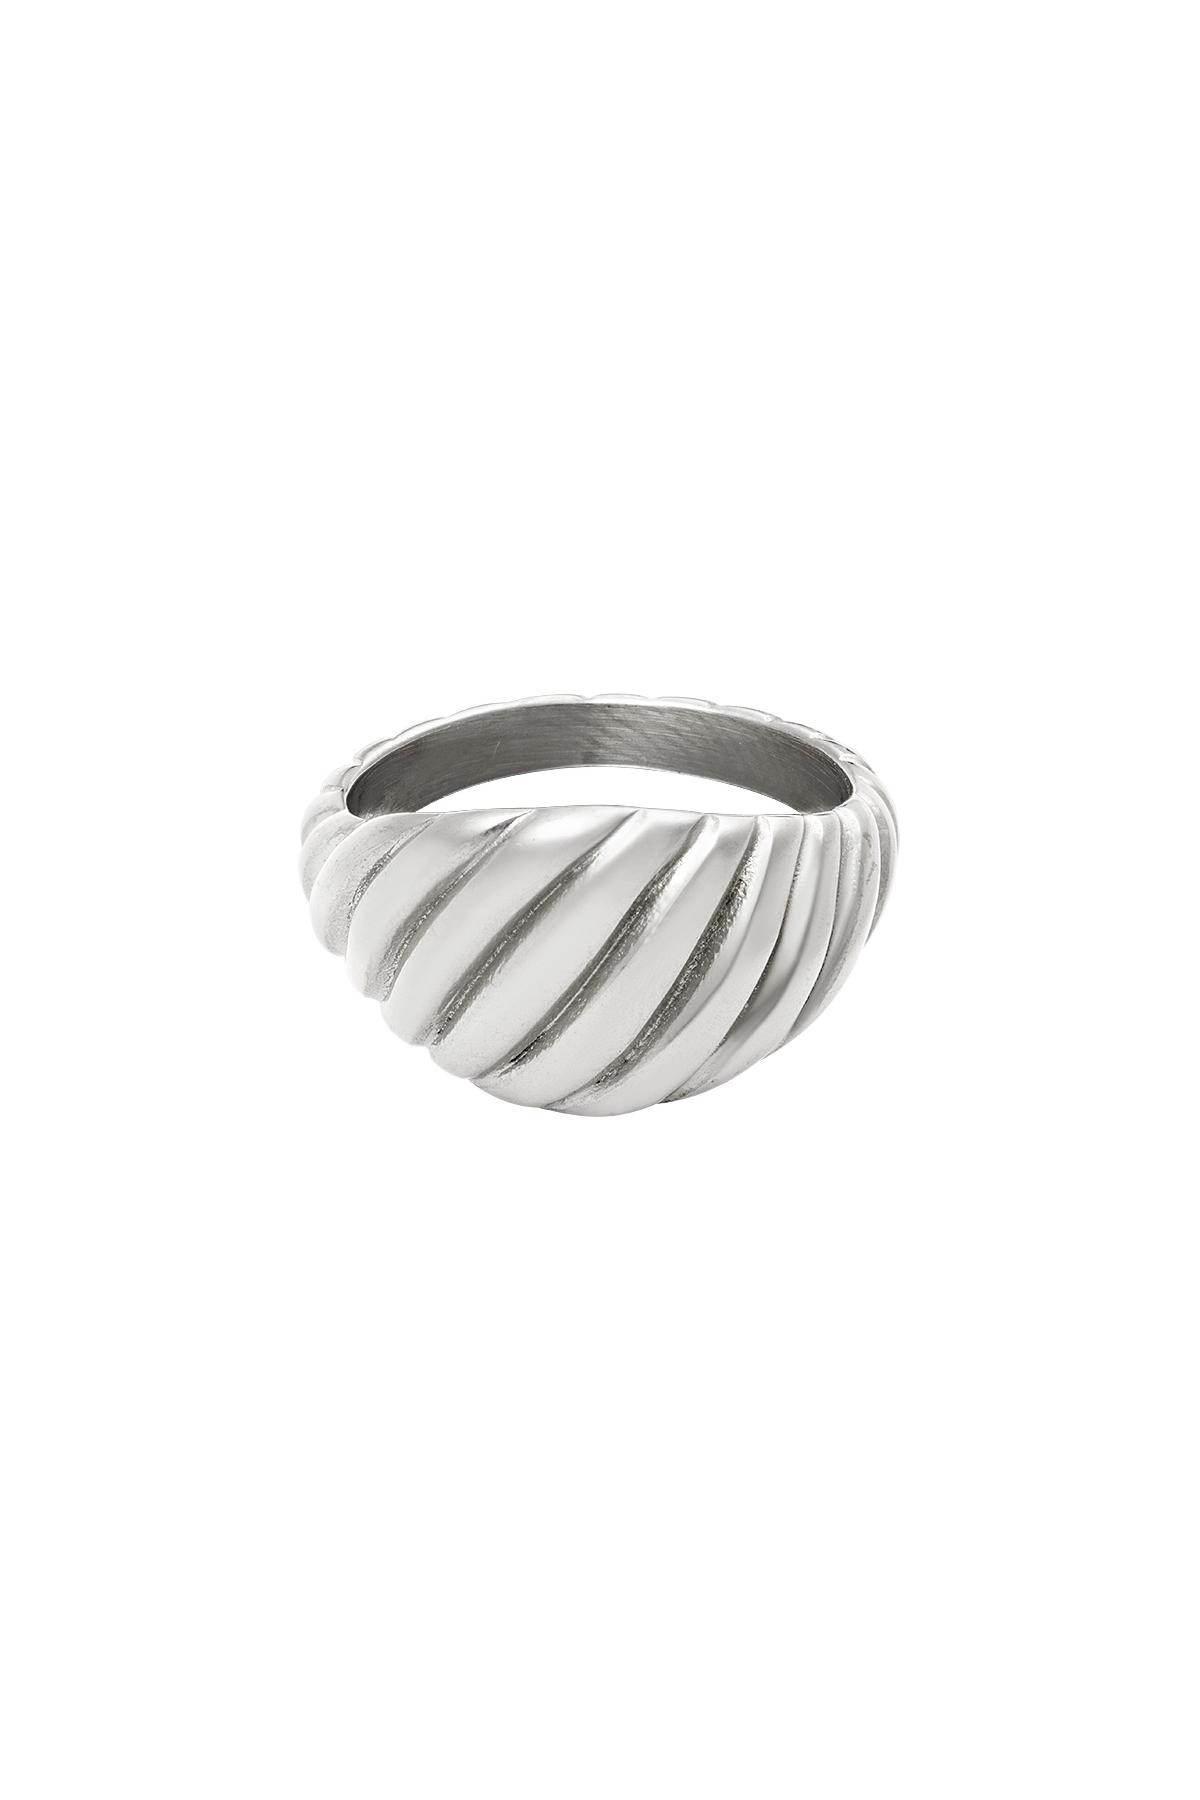 Baquette ring Zilver Stainless Steel 17 